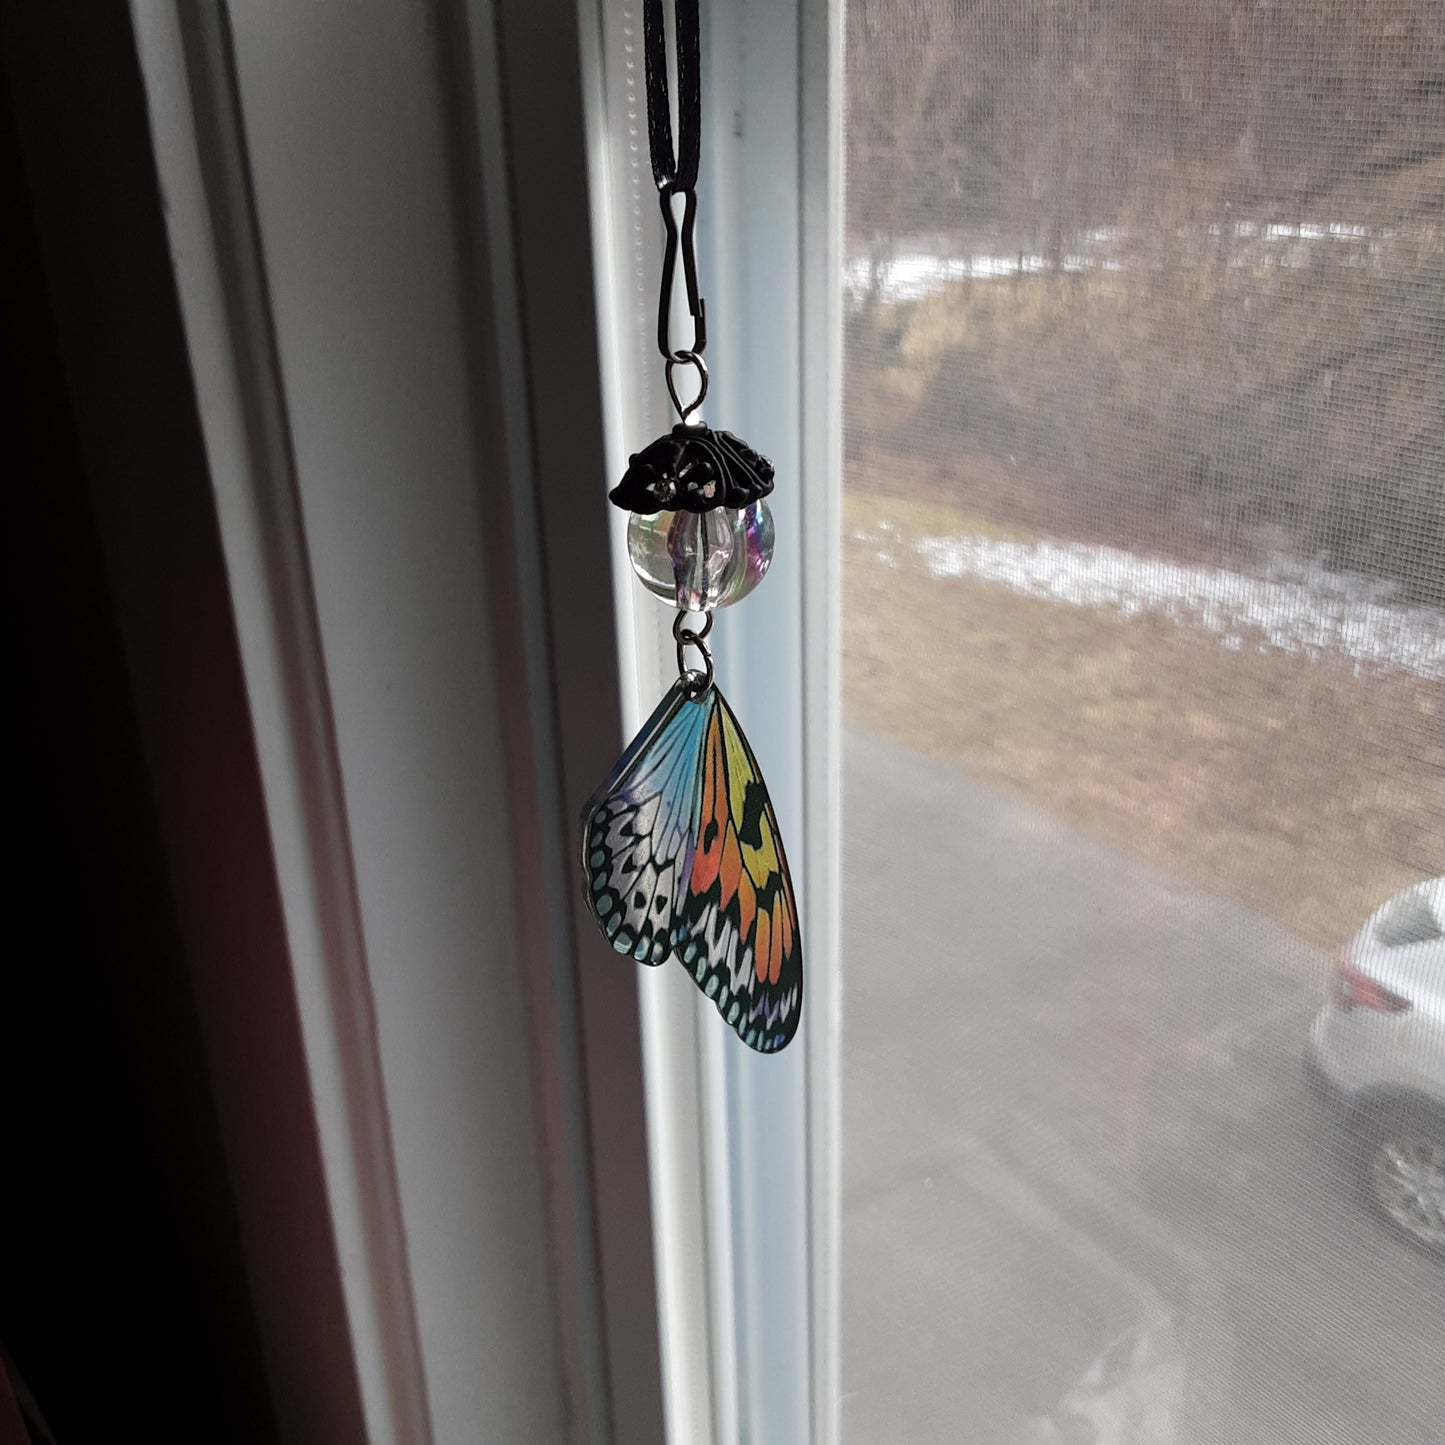 Holographic butterfly wing suncatcher or car mirror hanger